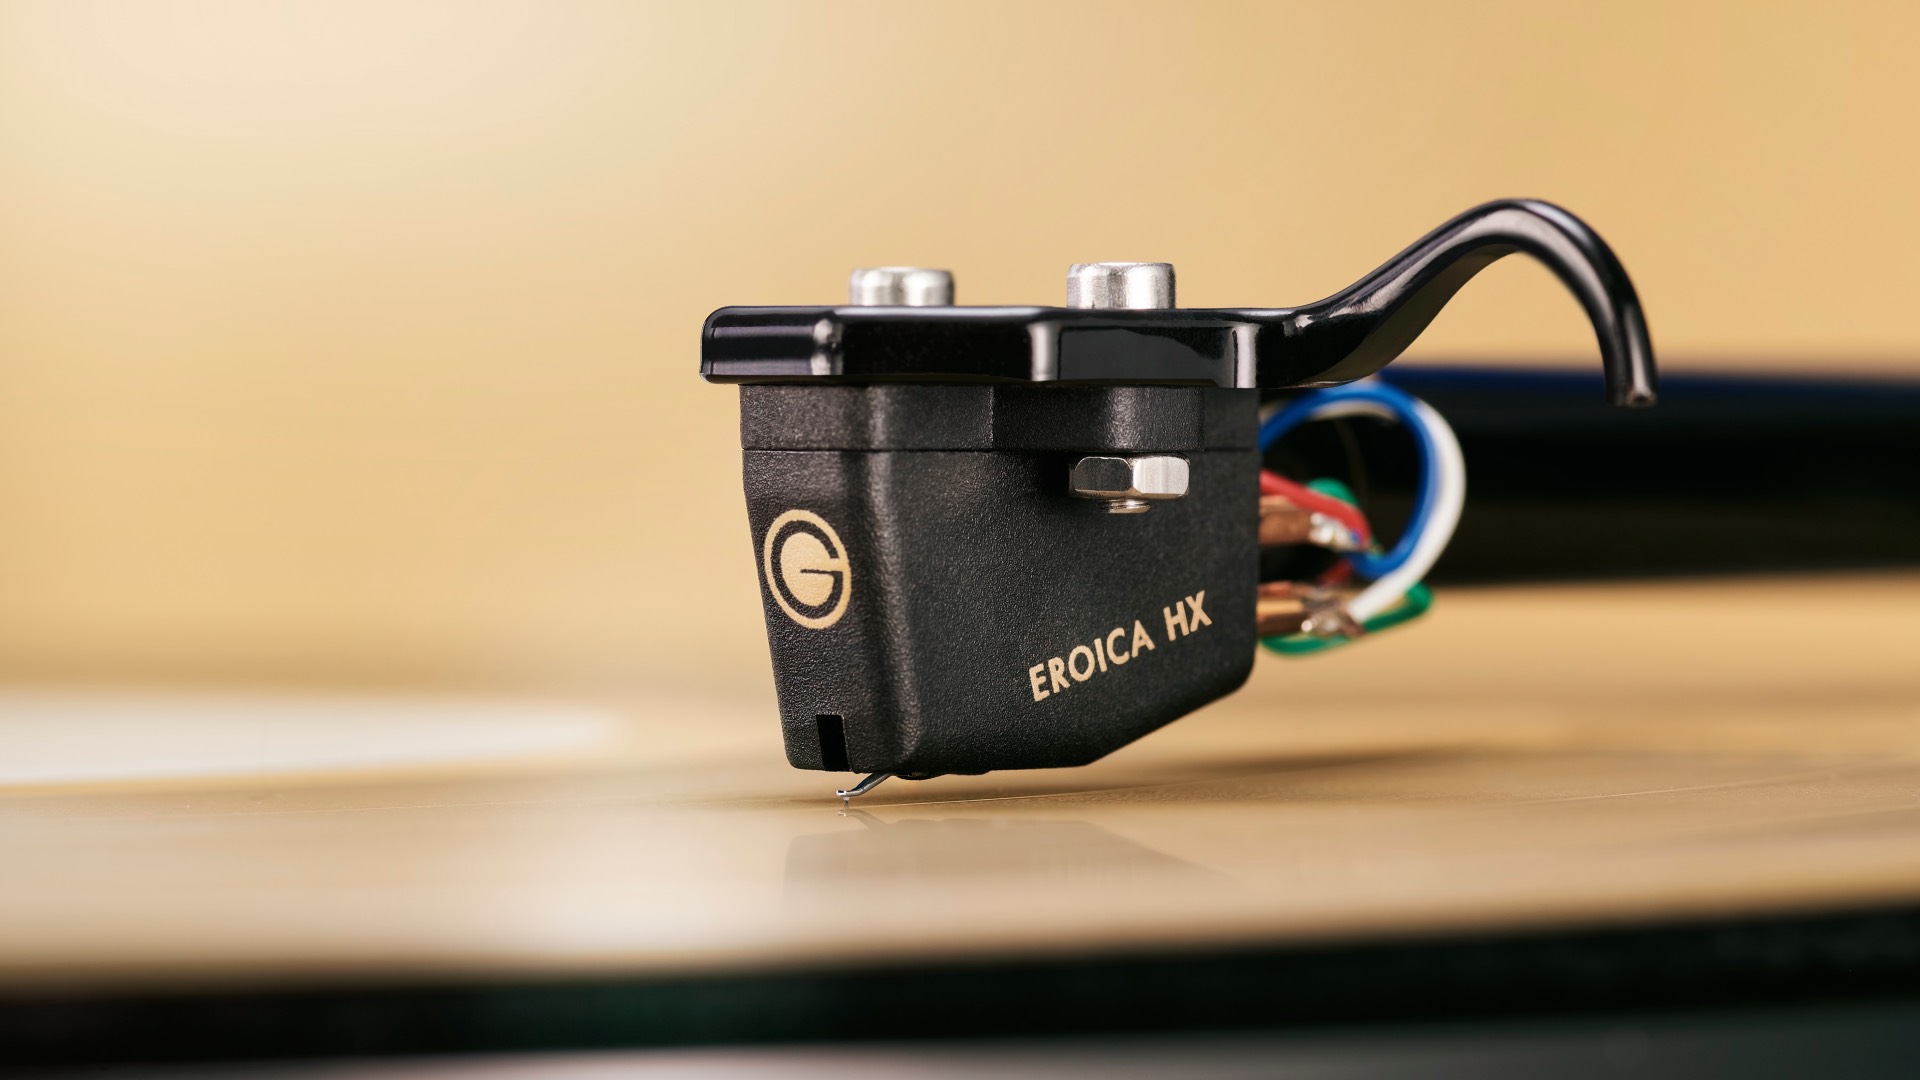 The Eroica HX is an MC cartridge with a particularly high output voltage. 